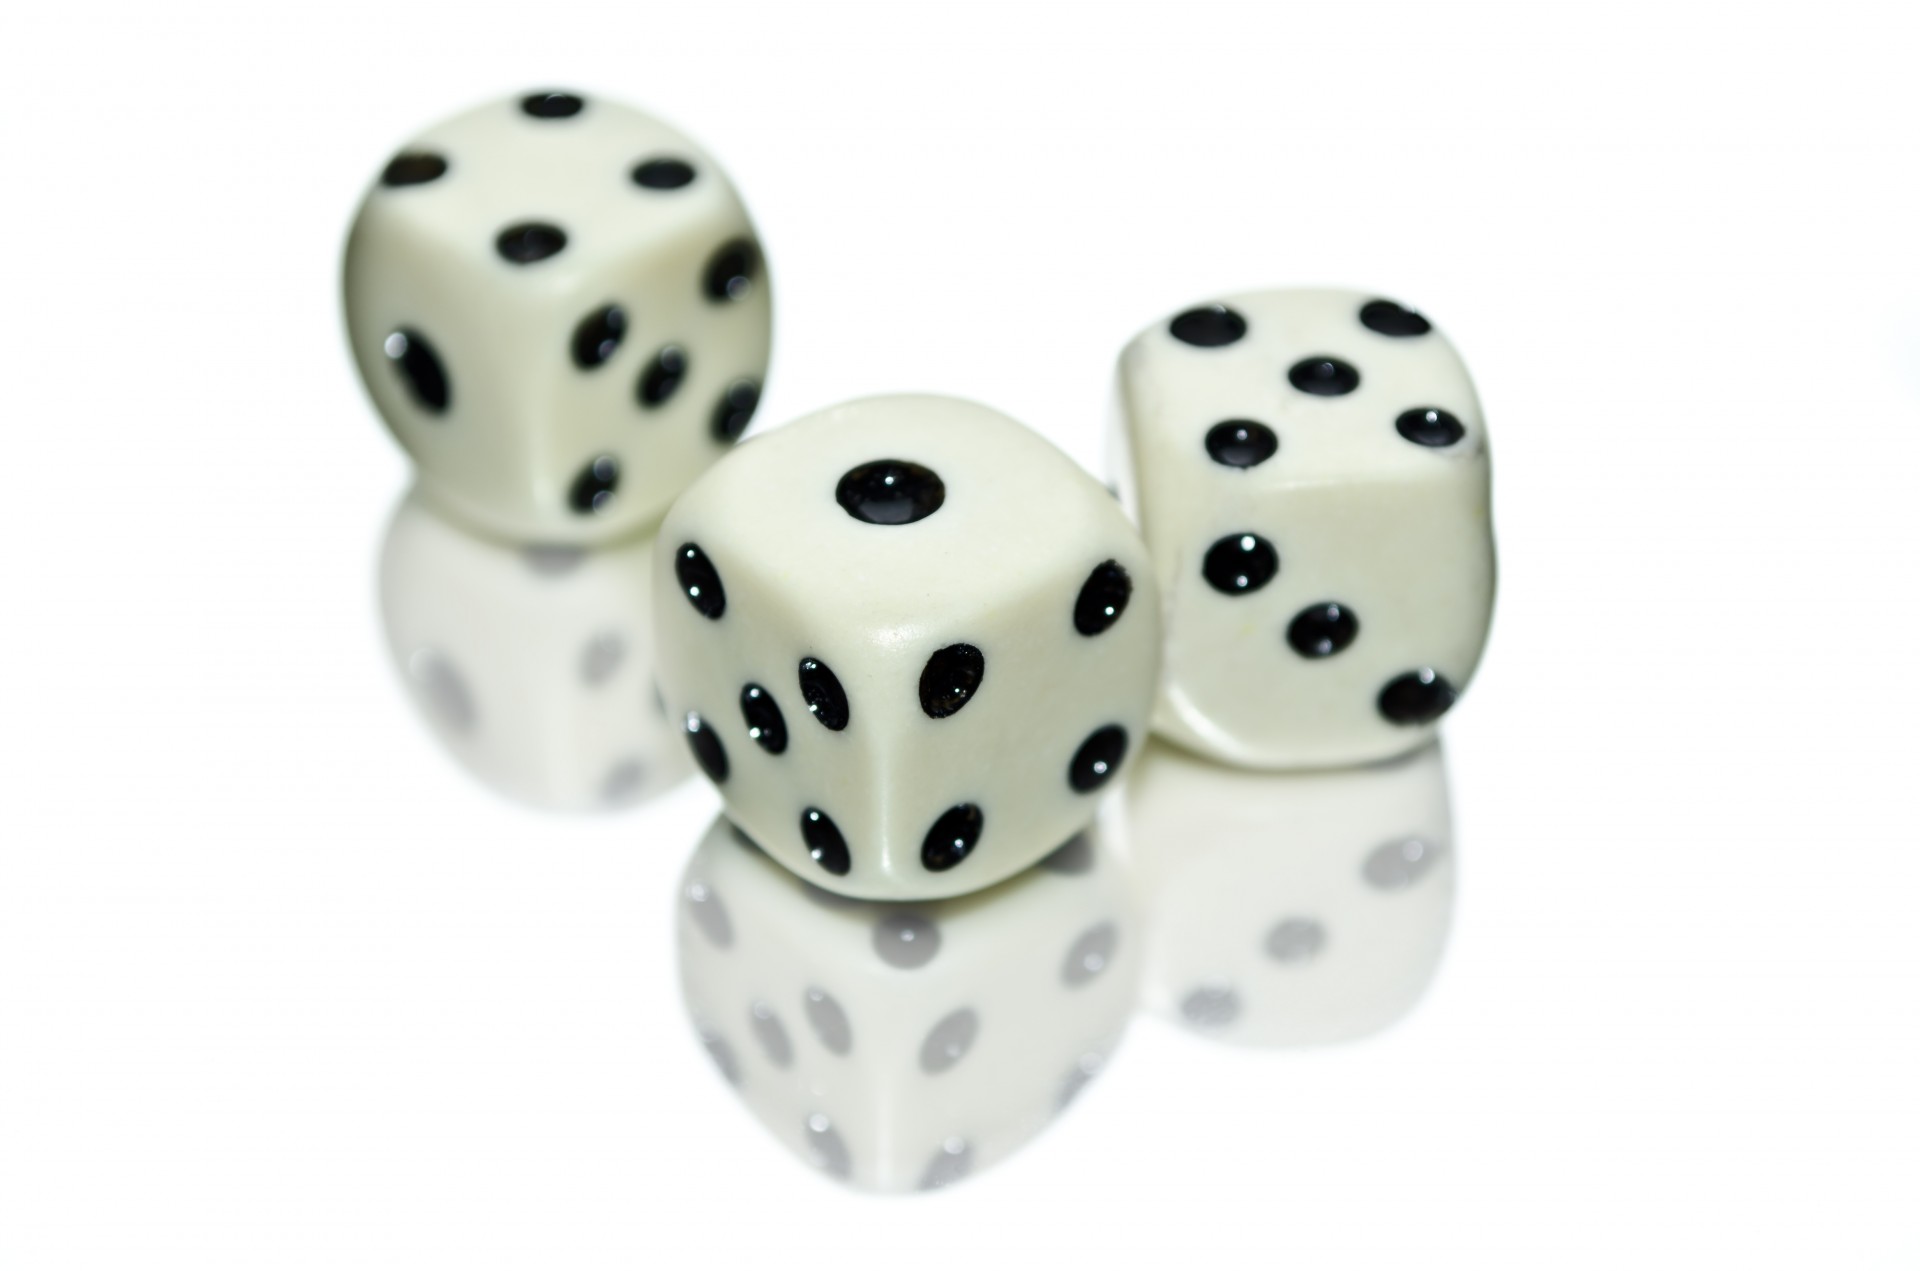 Playing Dice